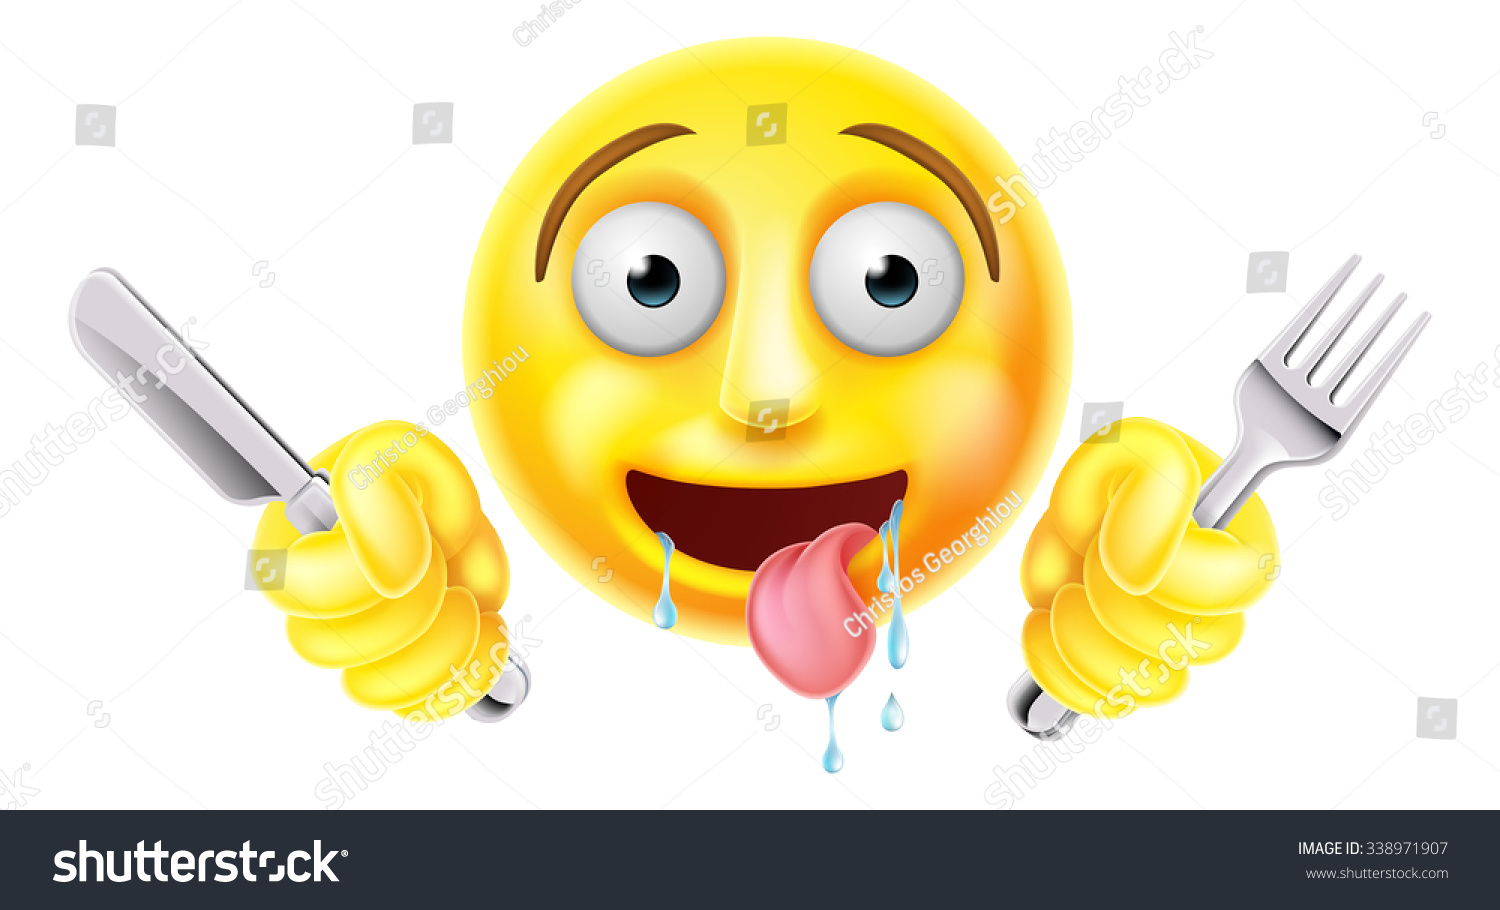 stock-vector-very-hungry-starving-emoticon-emoji-smiley-face-character-drooling-and-holding-a-knife-and-fork-338971907.jpg